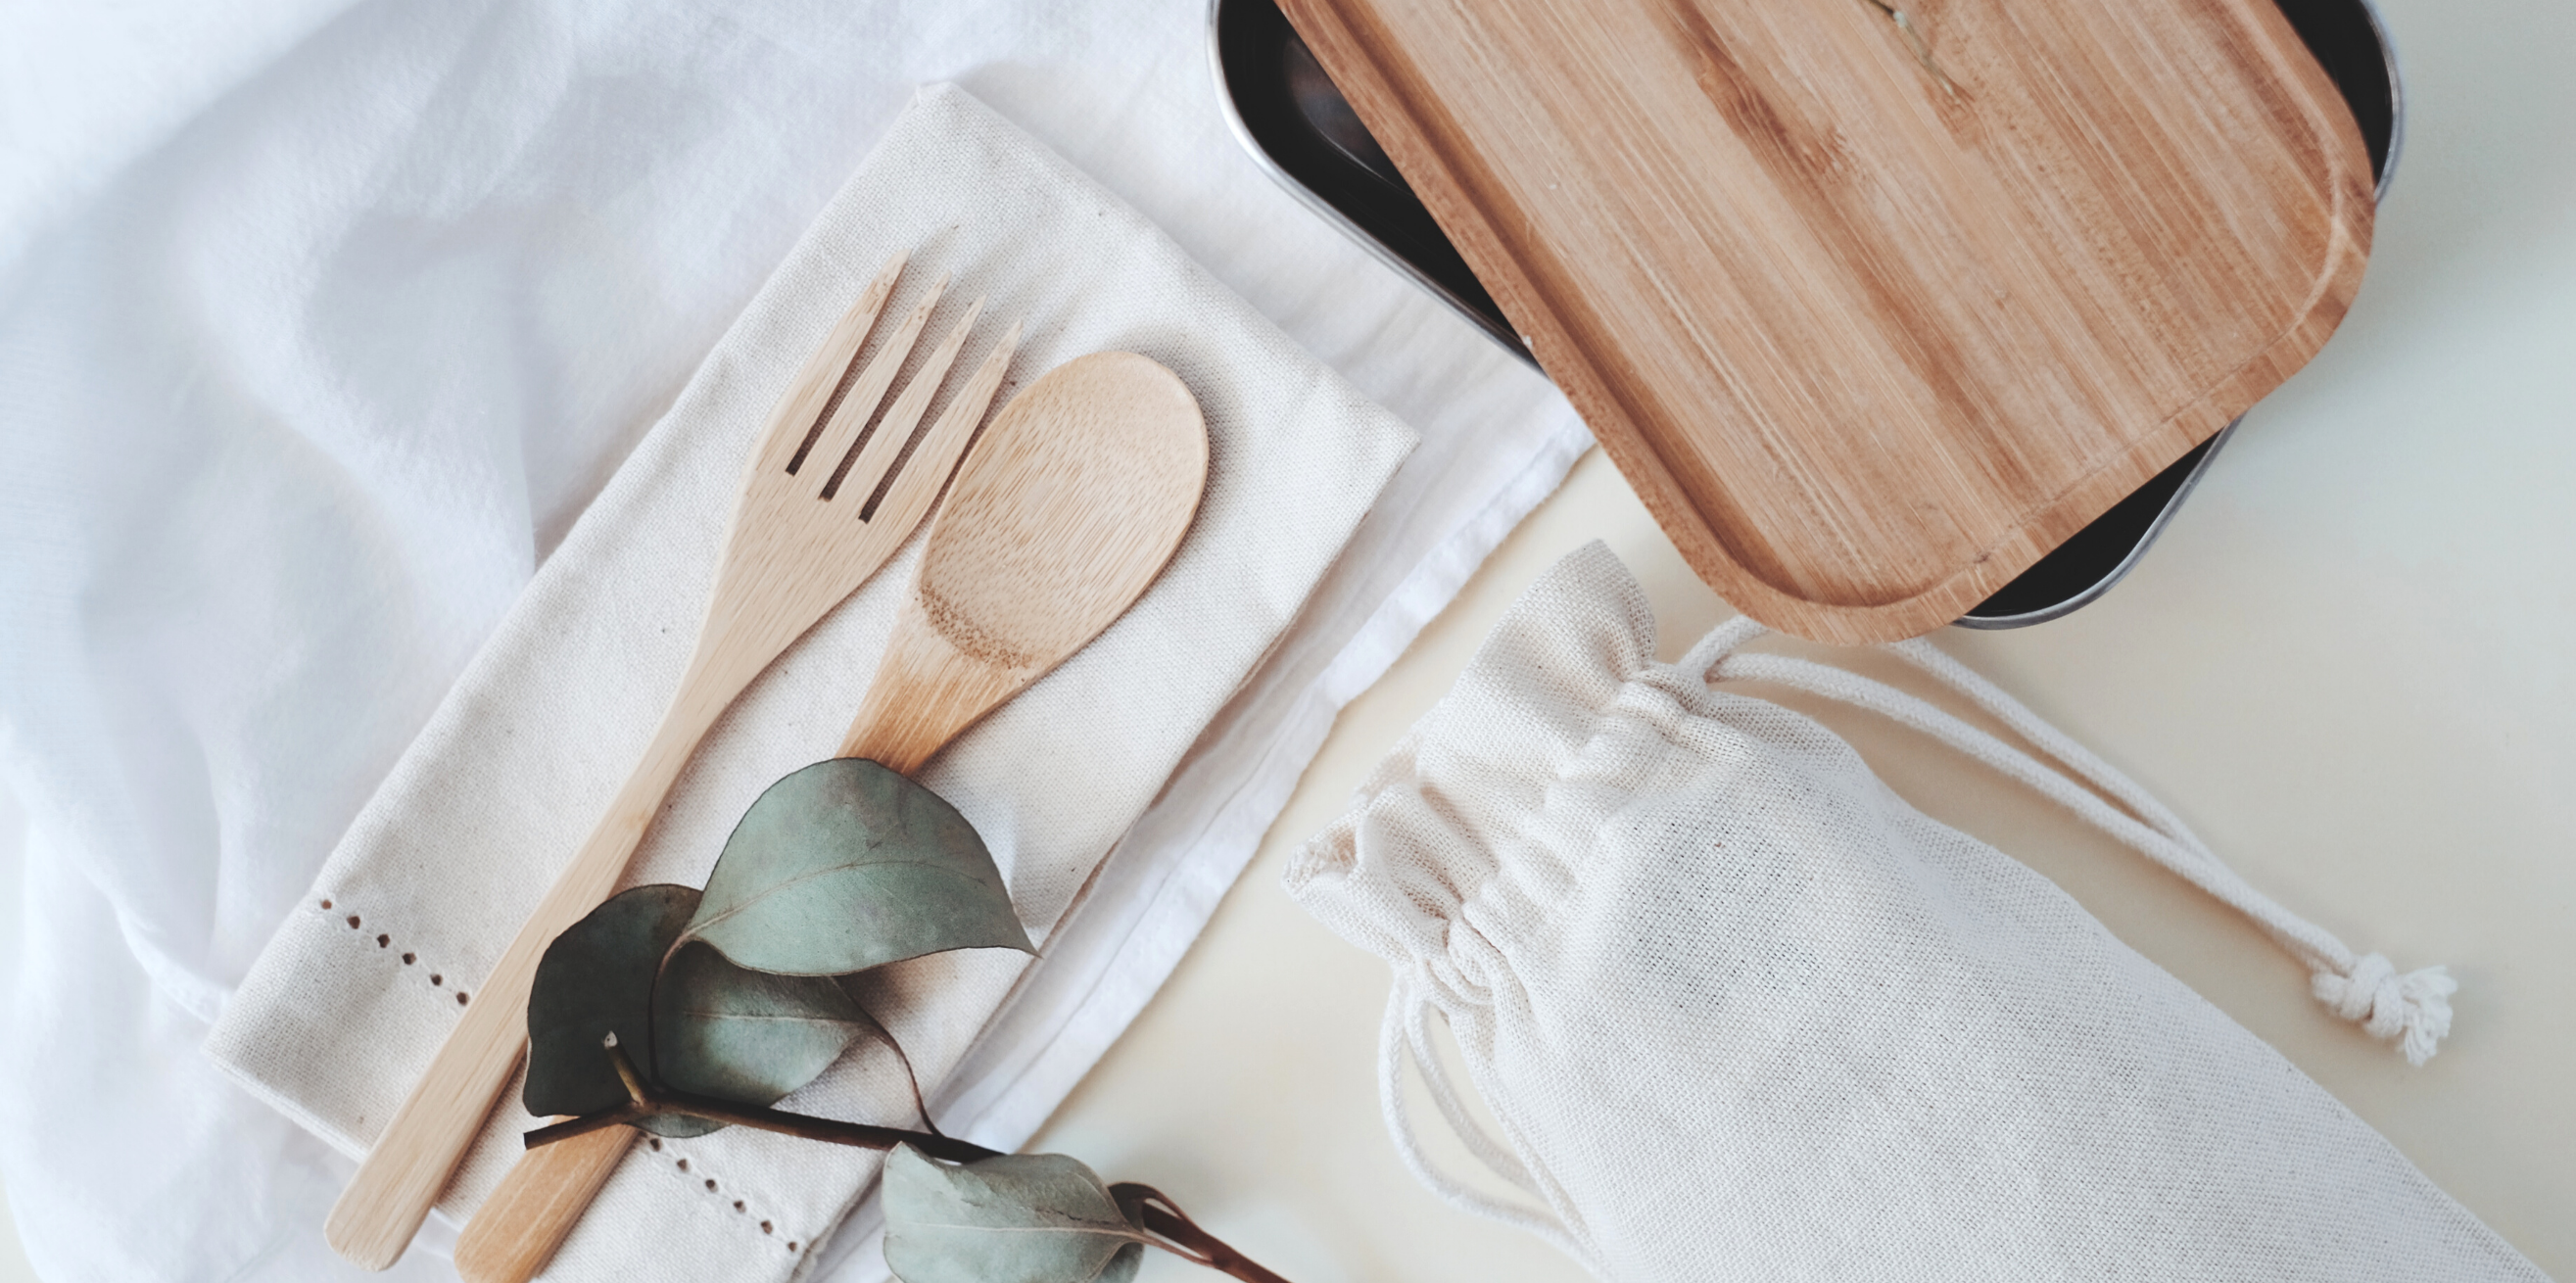 Easy Ways To Go Green - sustainable products flatlay